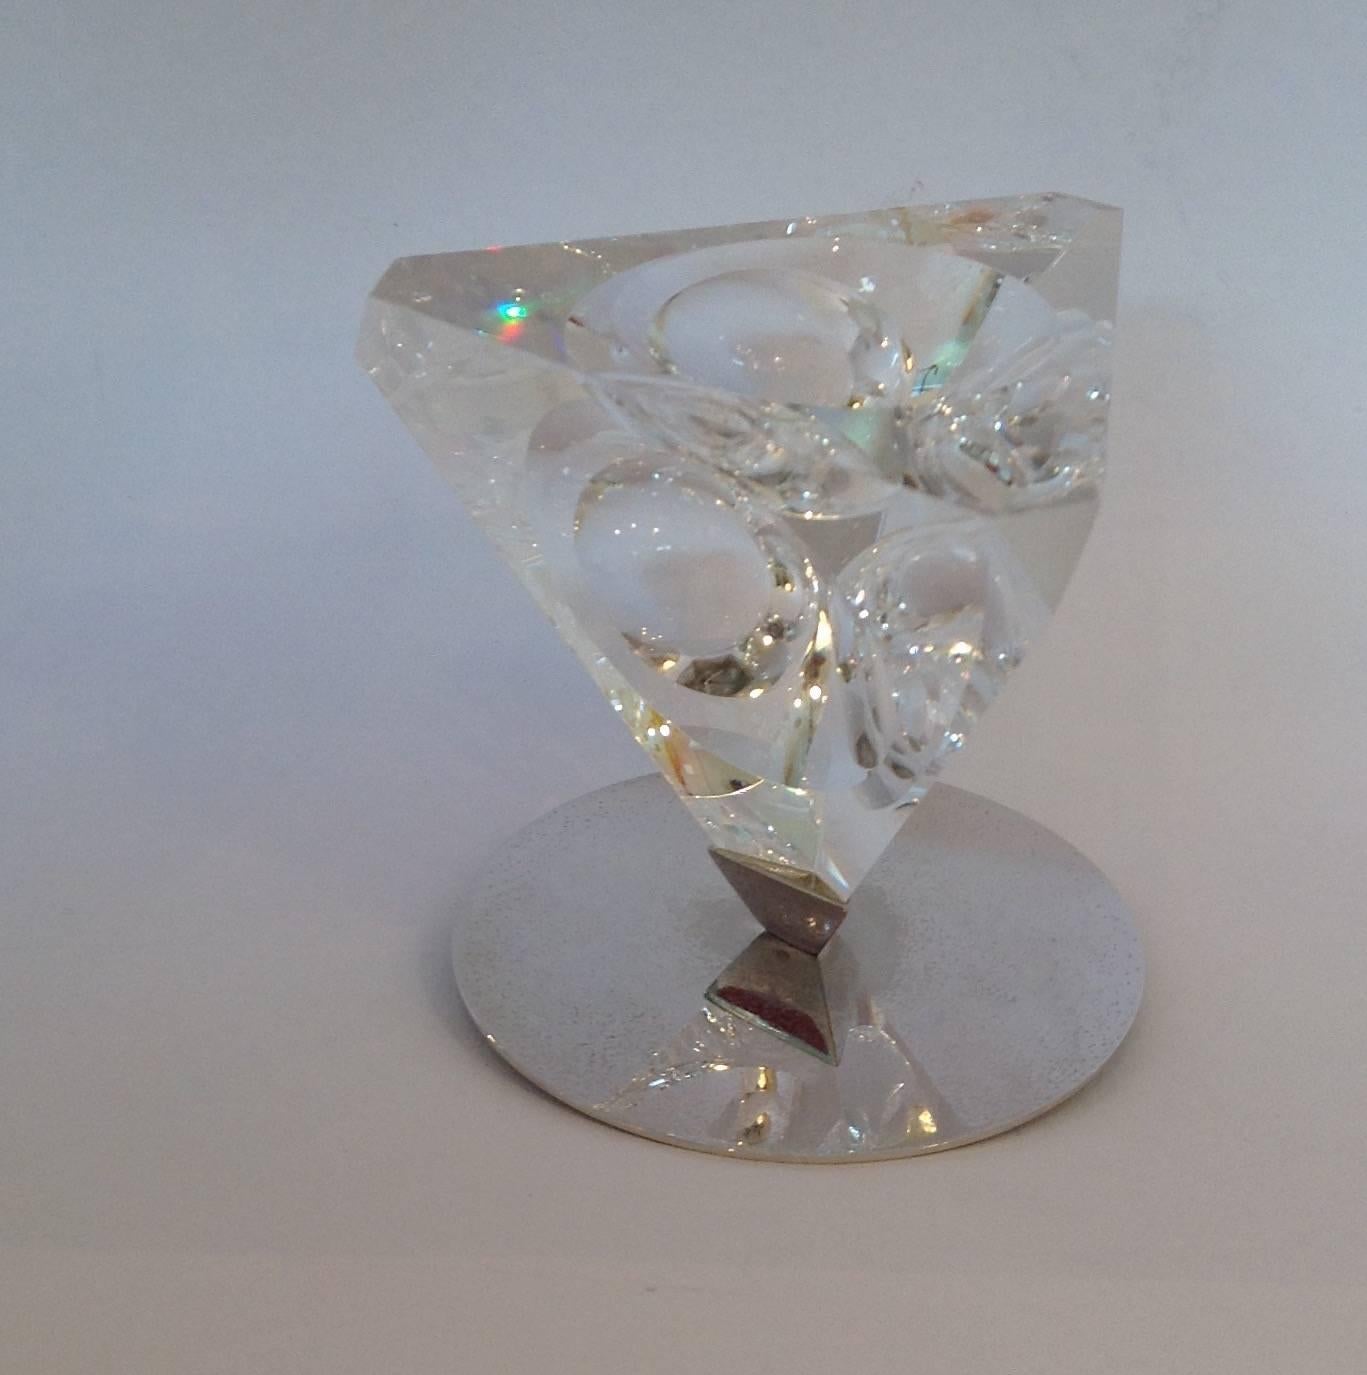 Steuben clear crystal sphere tetra ornament designed by Lloyd Atkins on a silver plated round metal base.